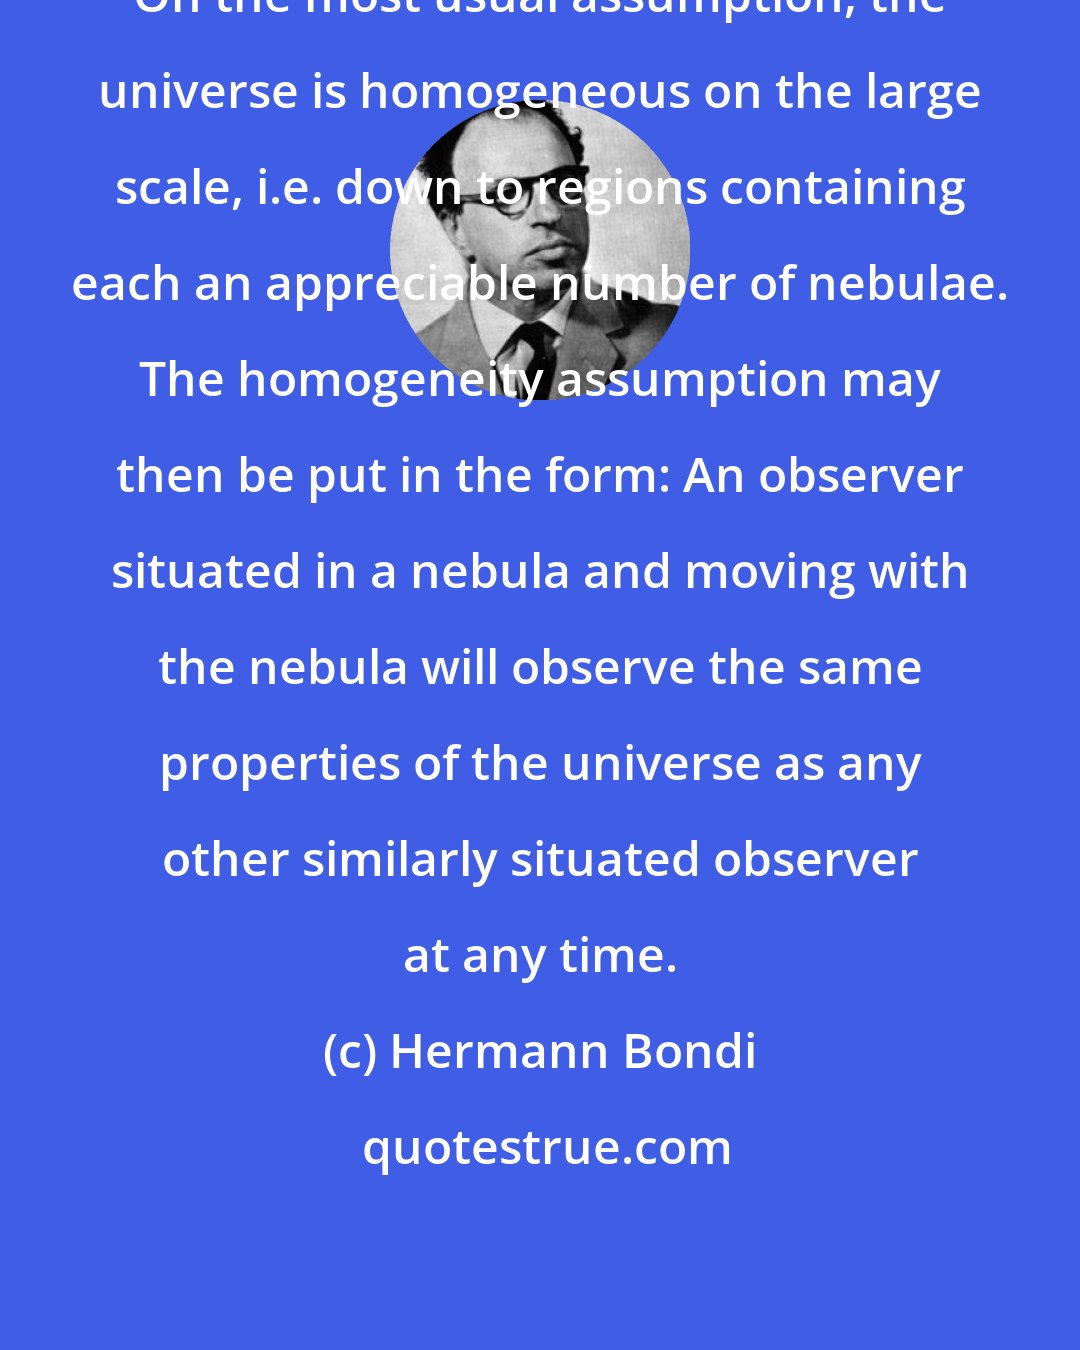 Hermann Bondi: On the most usual assumption, the universe is homogeneous on the large scale, i.e. down to regions containing each an appreciable number of nebulae. The homogeneity assumption may then be put in the form: An observer situated in a nebula and moving with the nebula will observe the same properties of the universe as any other similarly situated observer at any time.